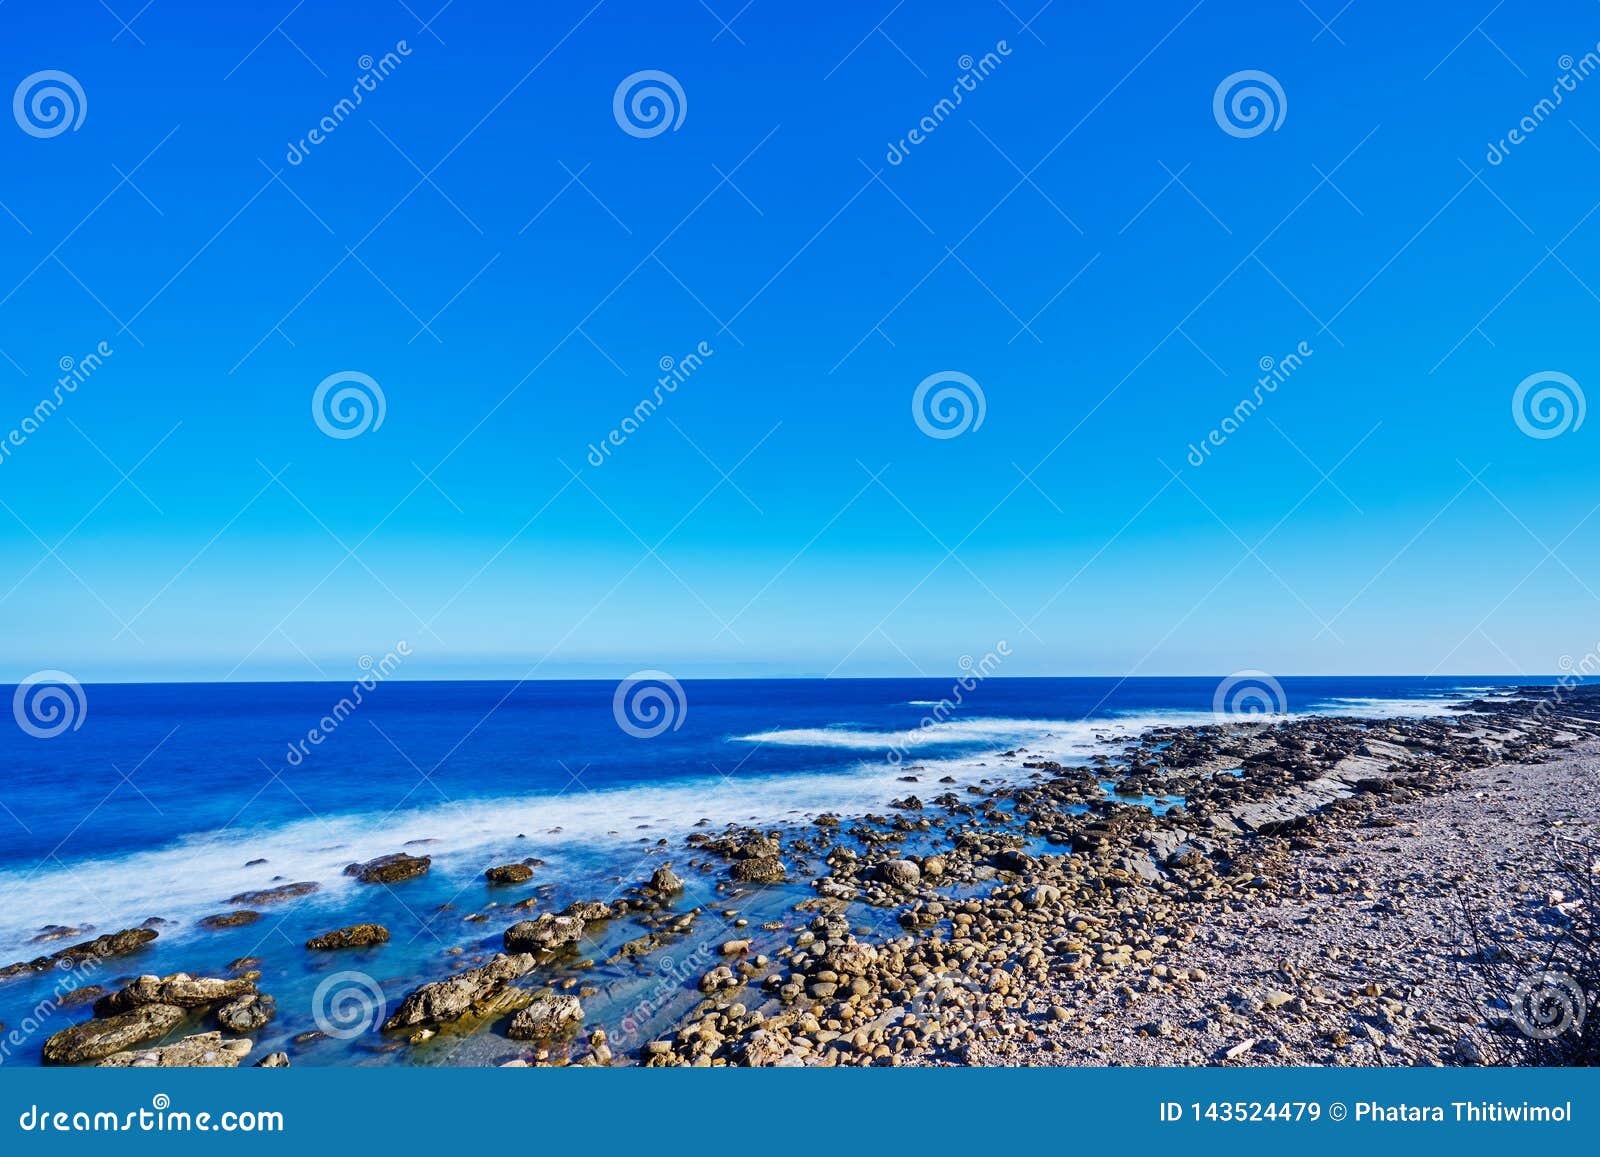 beautiful scenics of jialulan rocky beach by the waves combine with the breeze and the sky in taitung city